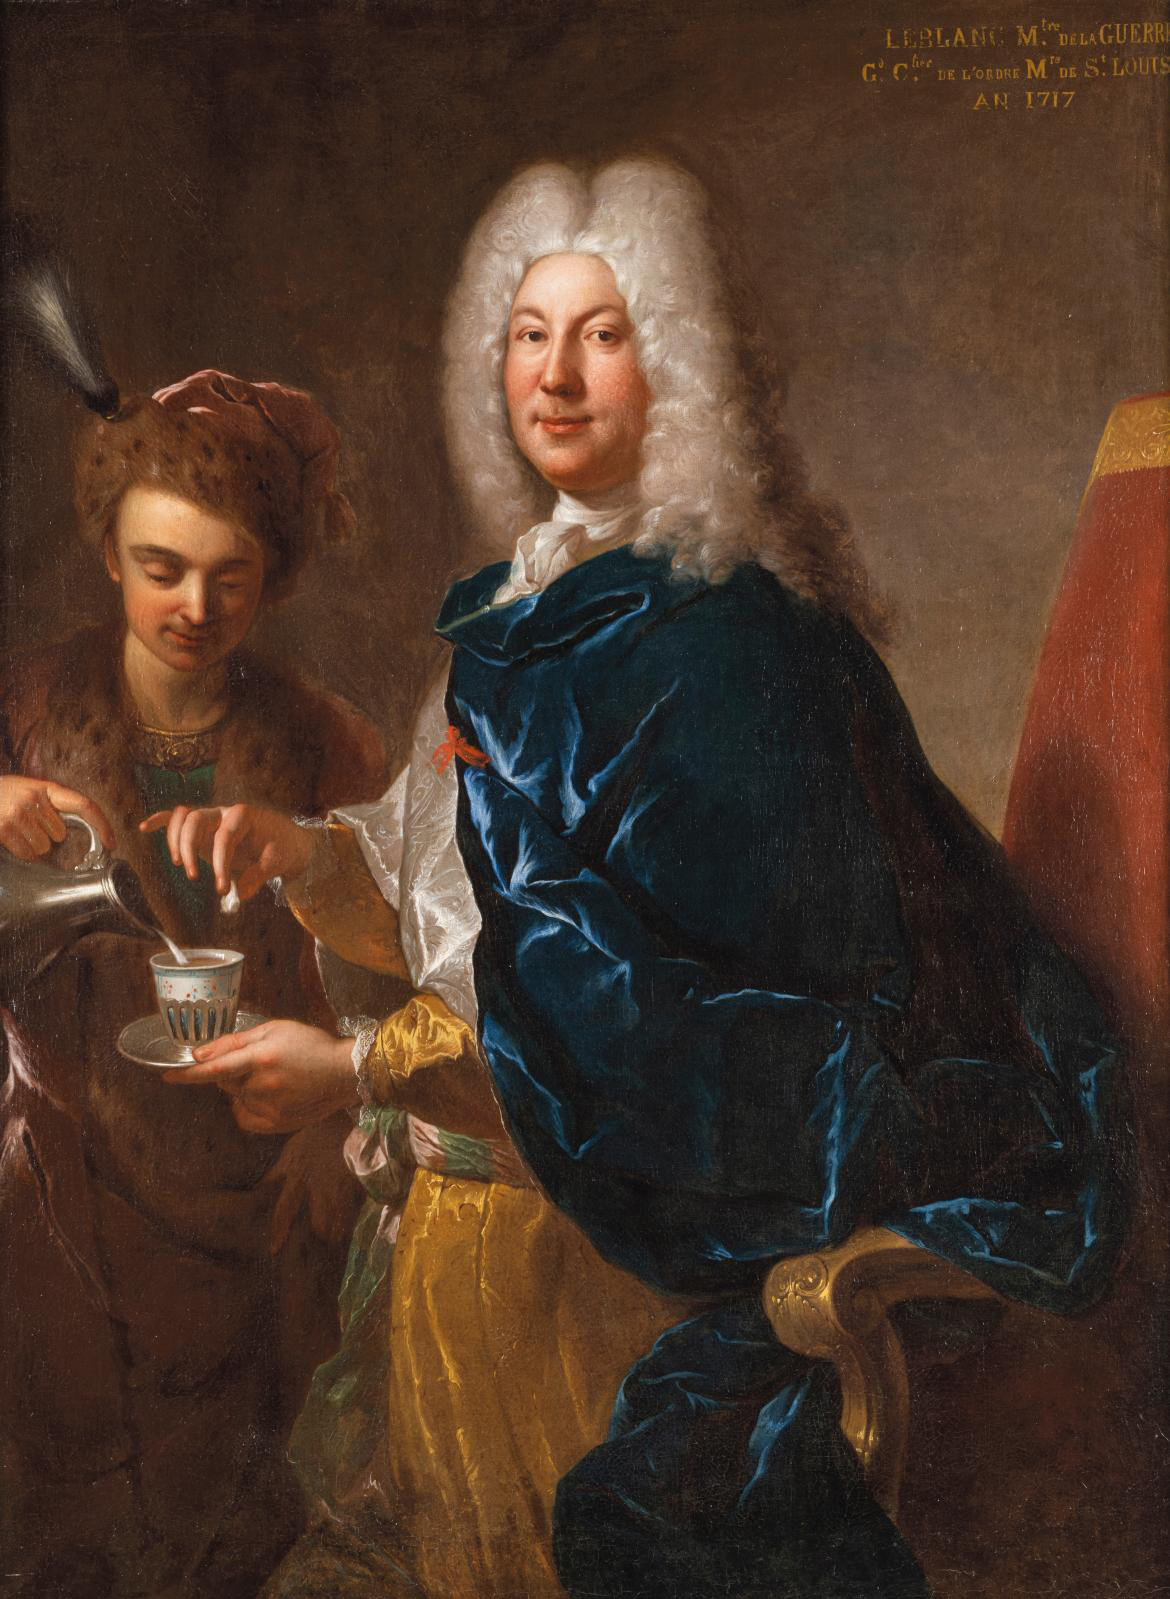 When the Elites Were Drinking Chocolate by François de Troy